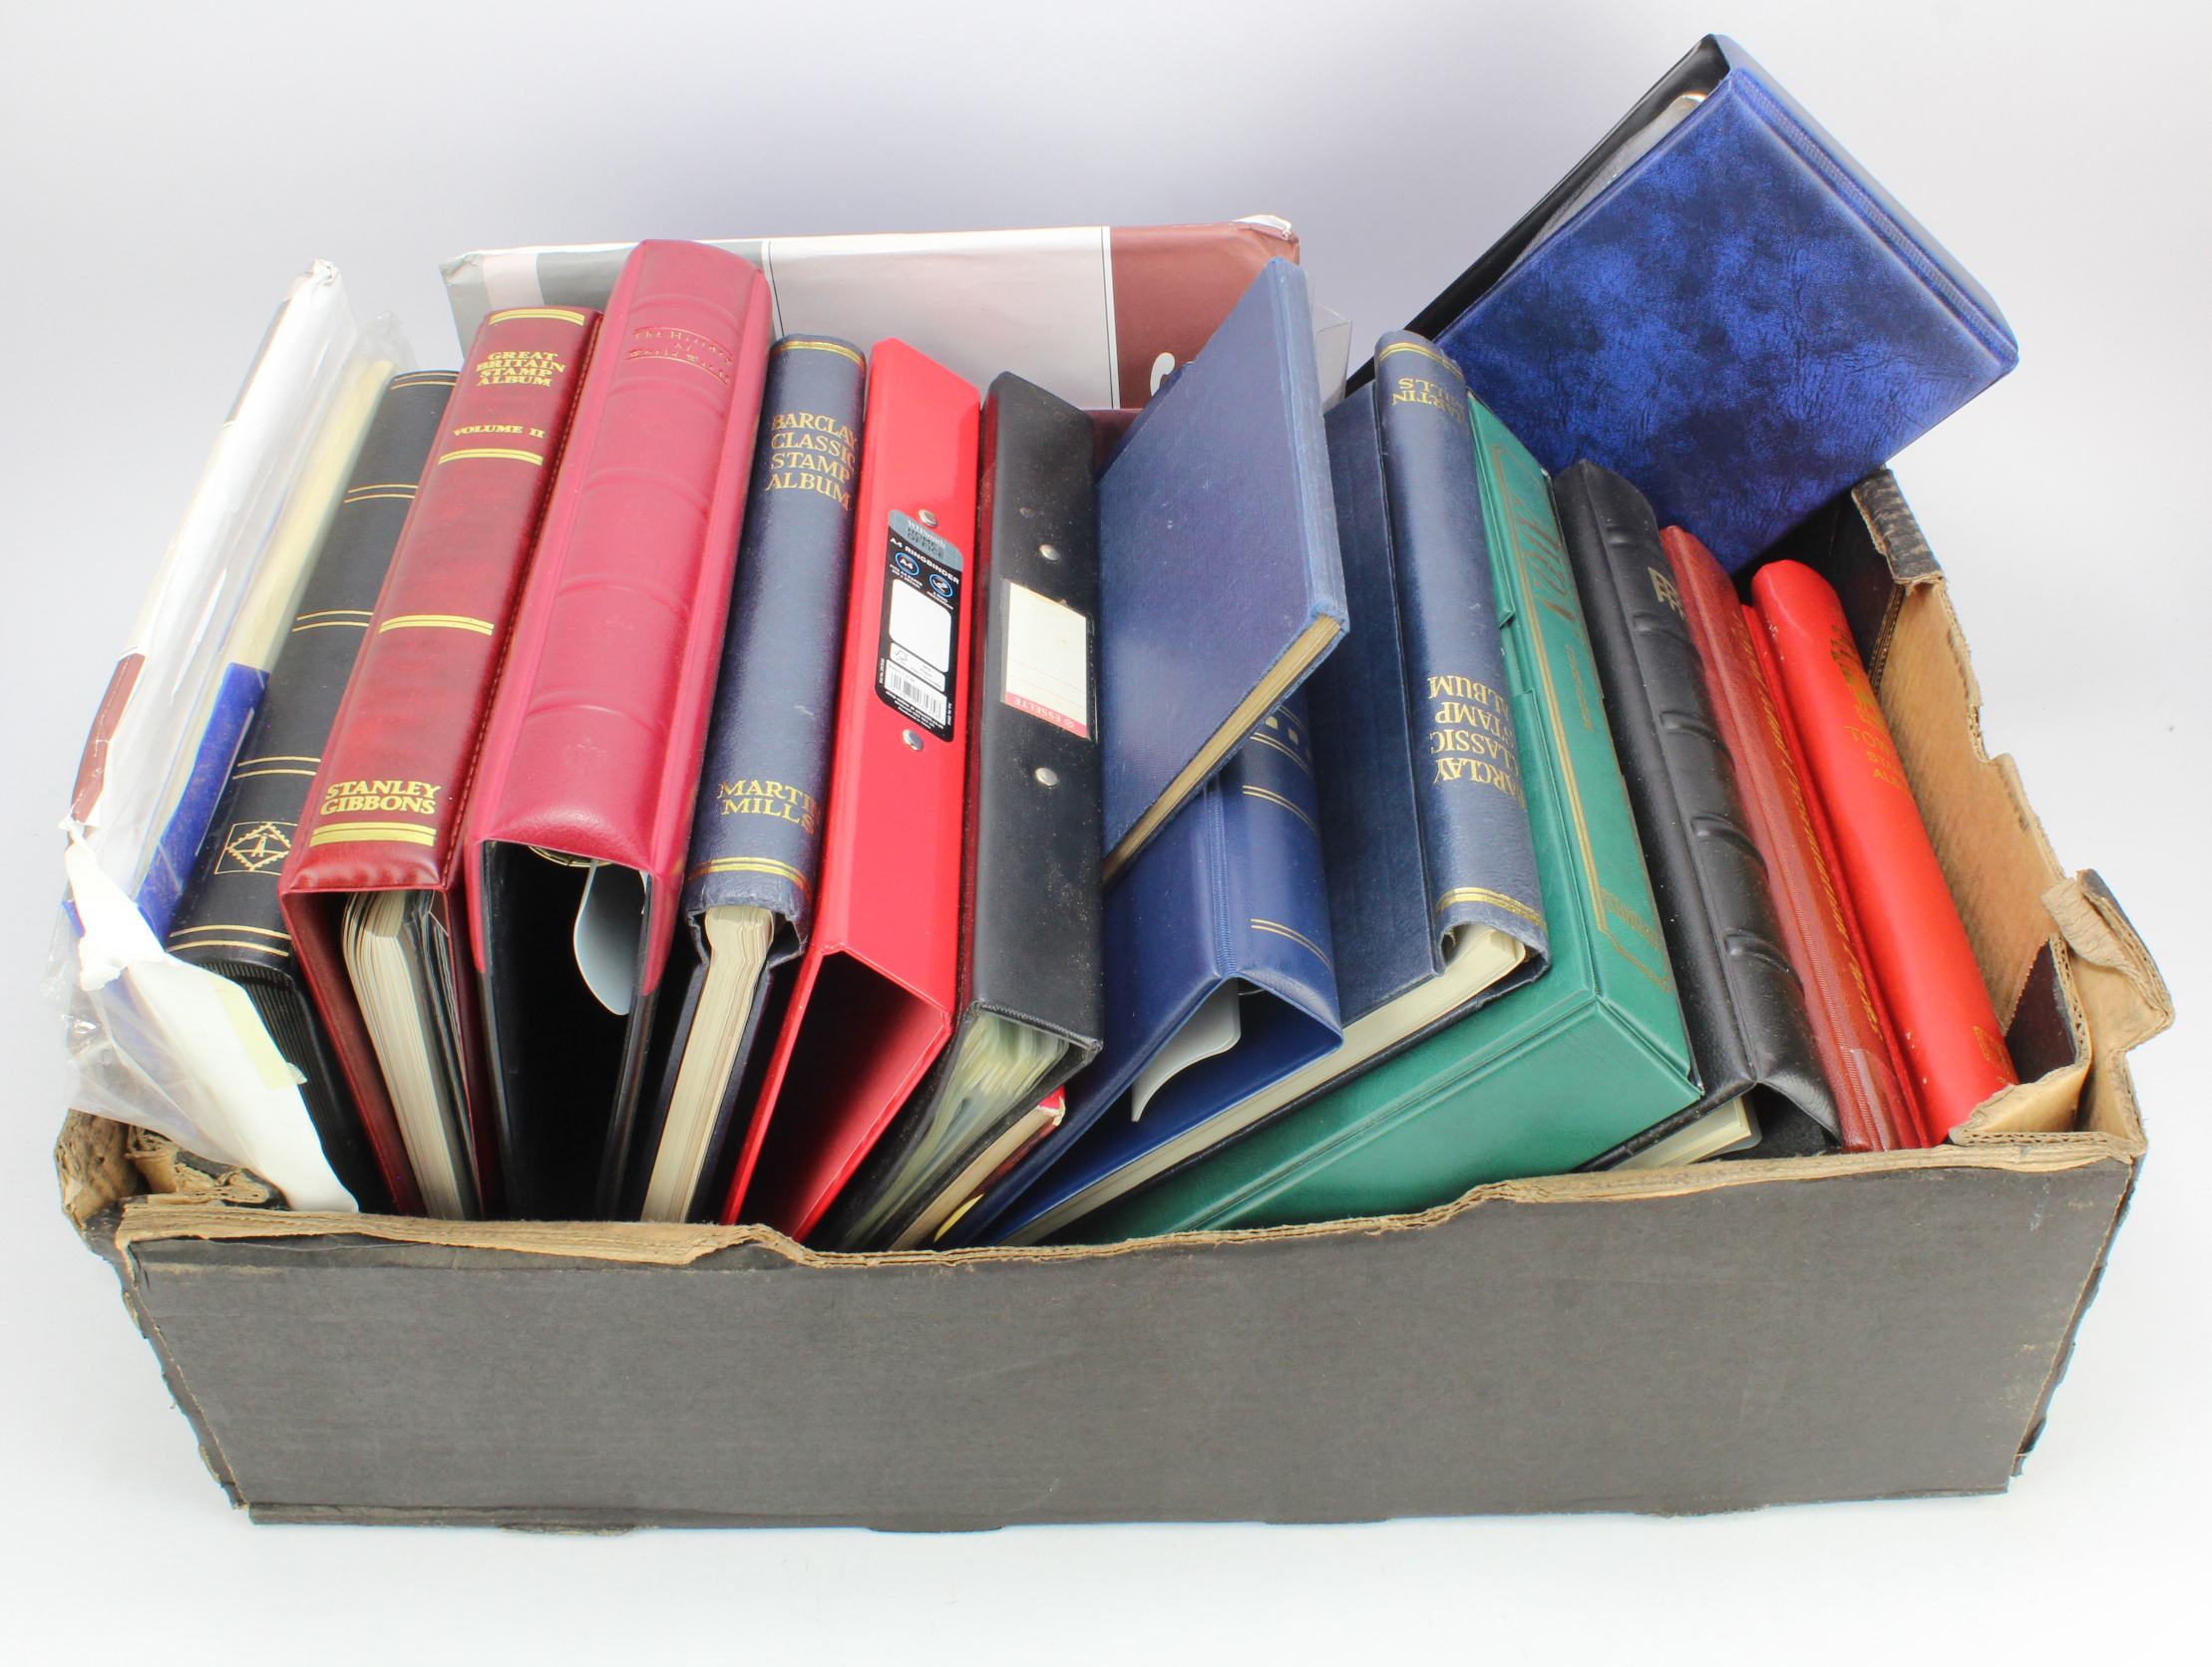 Accessories large banana box packed with 2nd hand albums / binders and stockbooks, plus several